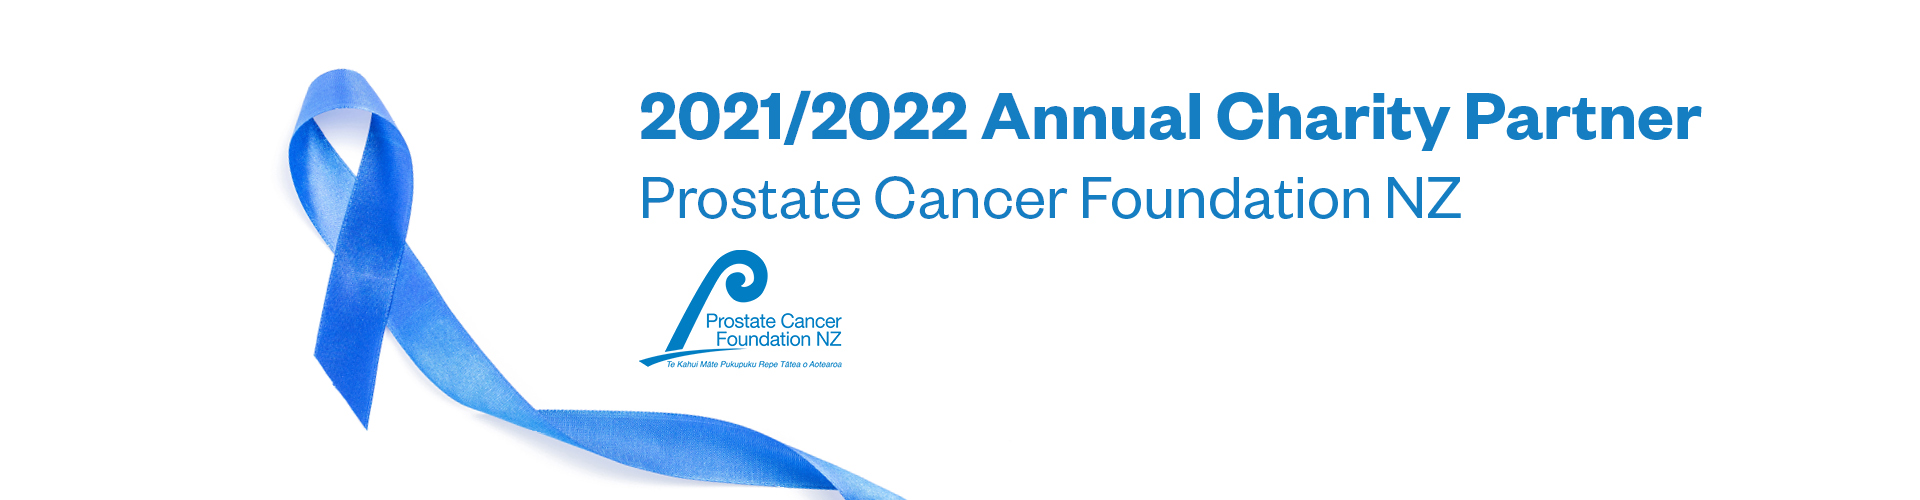 Prostate Cancer Charity banner 1920x500